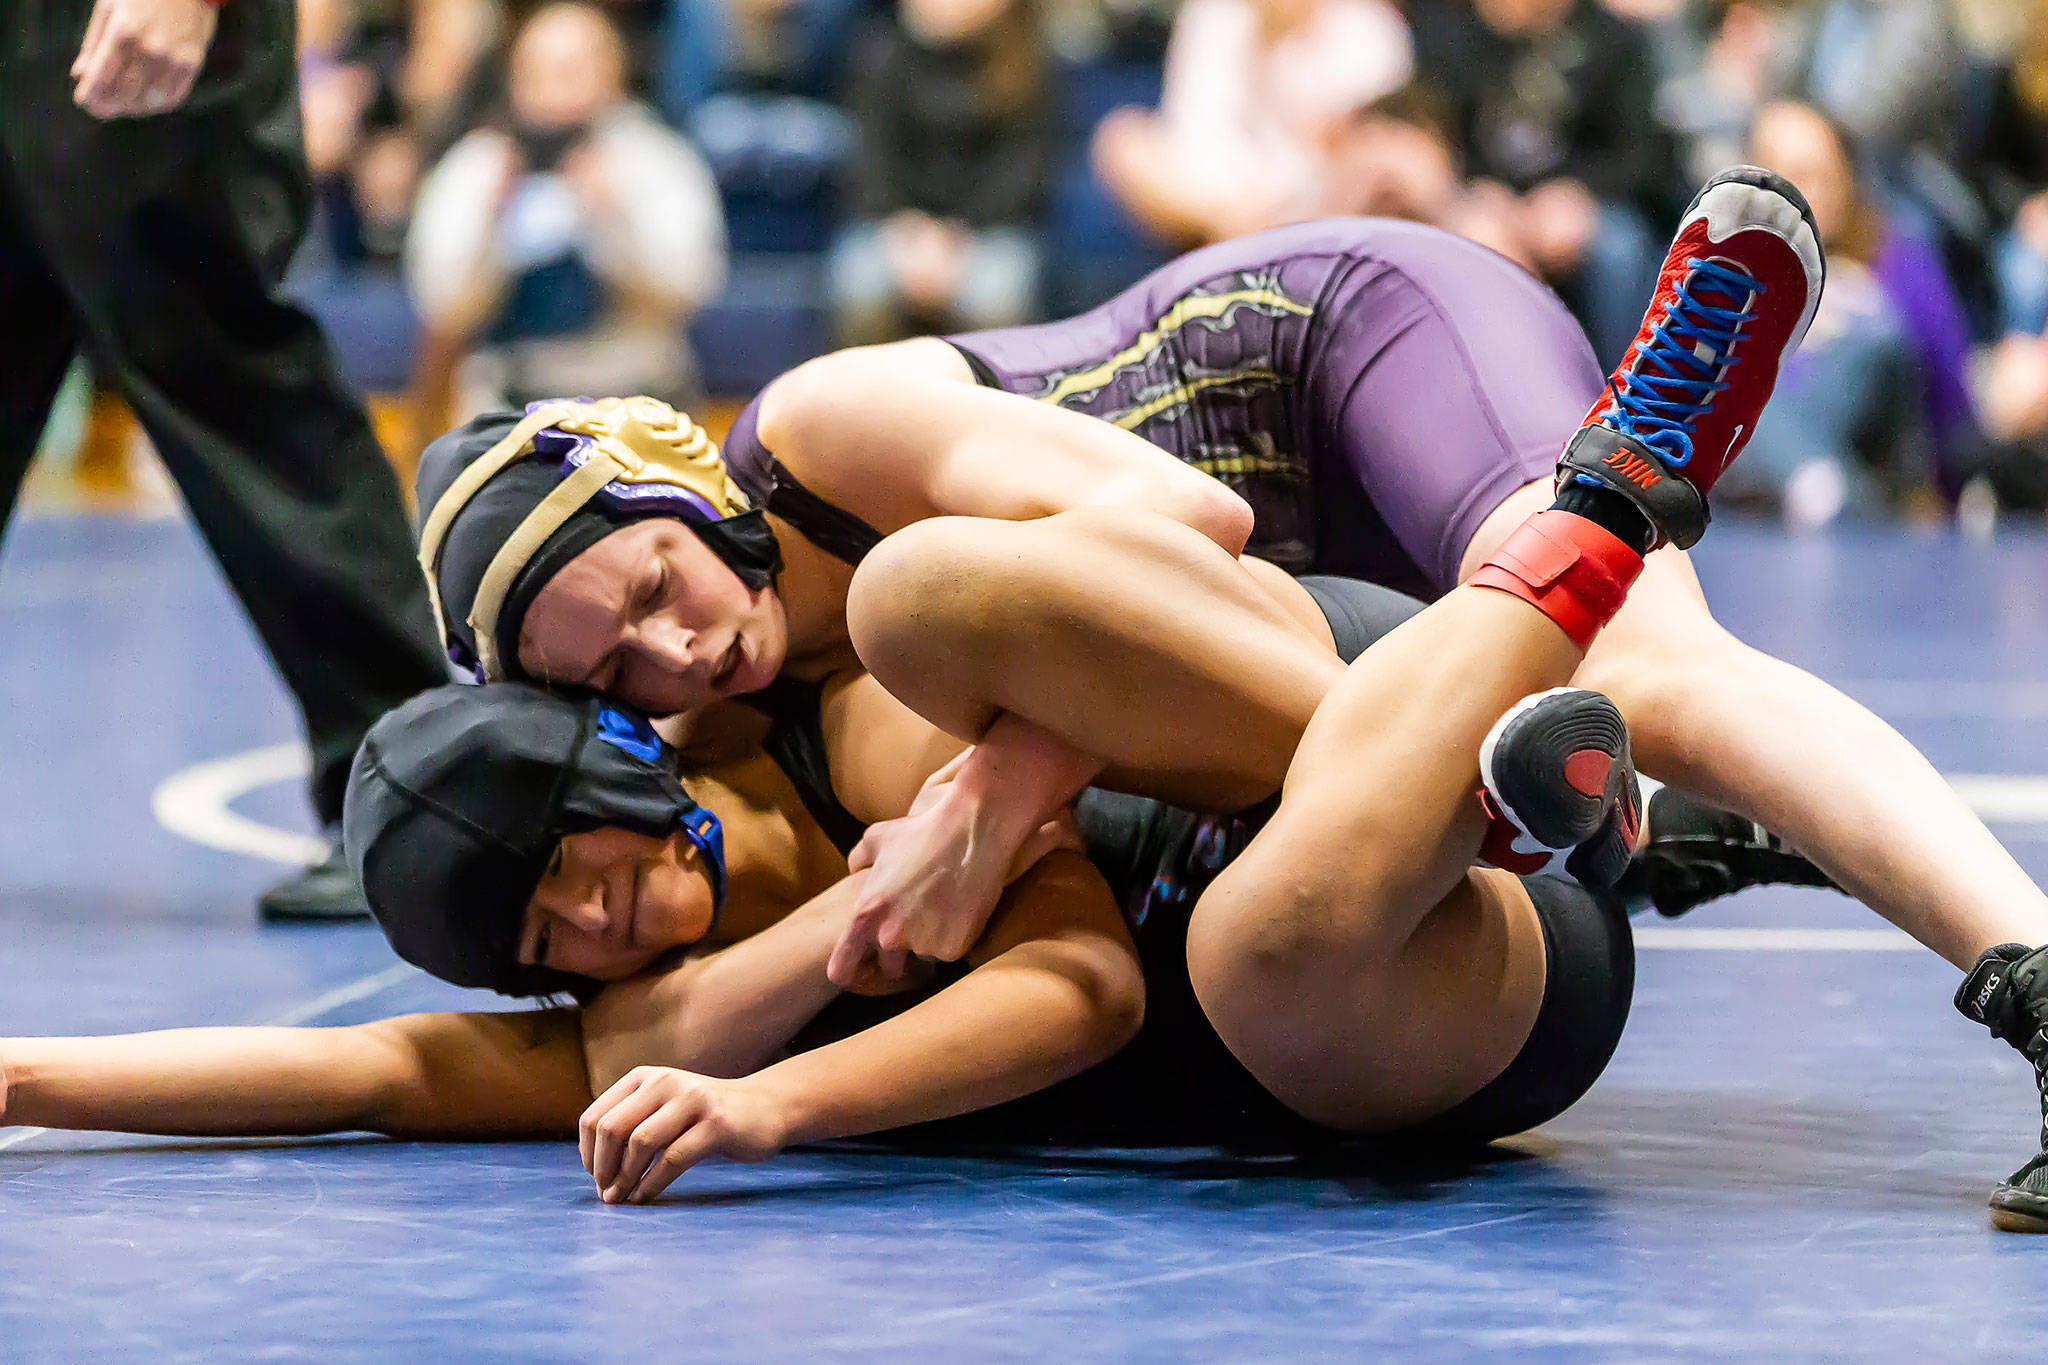 Oak Harbor’s Ella Erikson, top, competes in the Arlington tournament Saturday. Erikson finished second in the 115-pound class. (Photo by John Fisken)